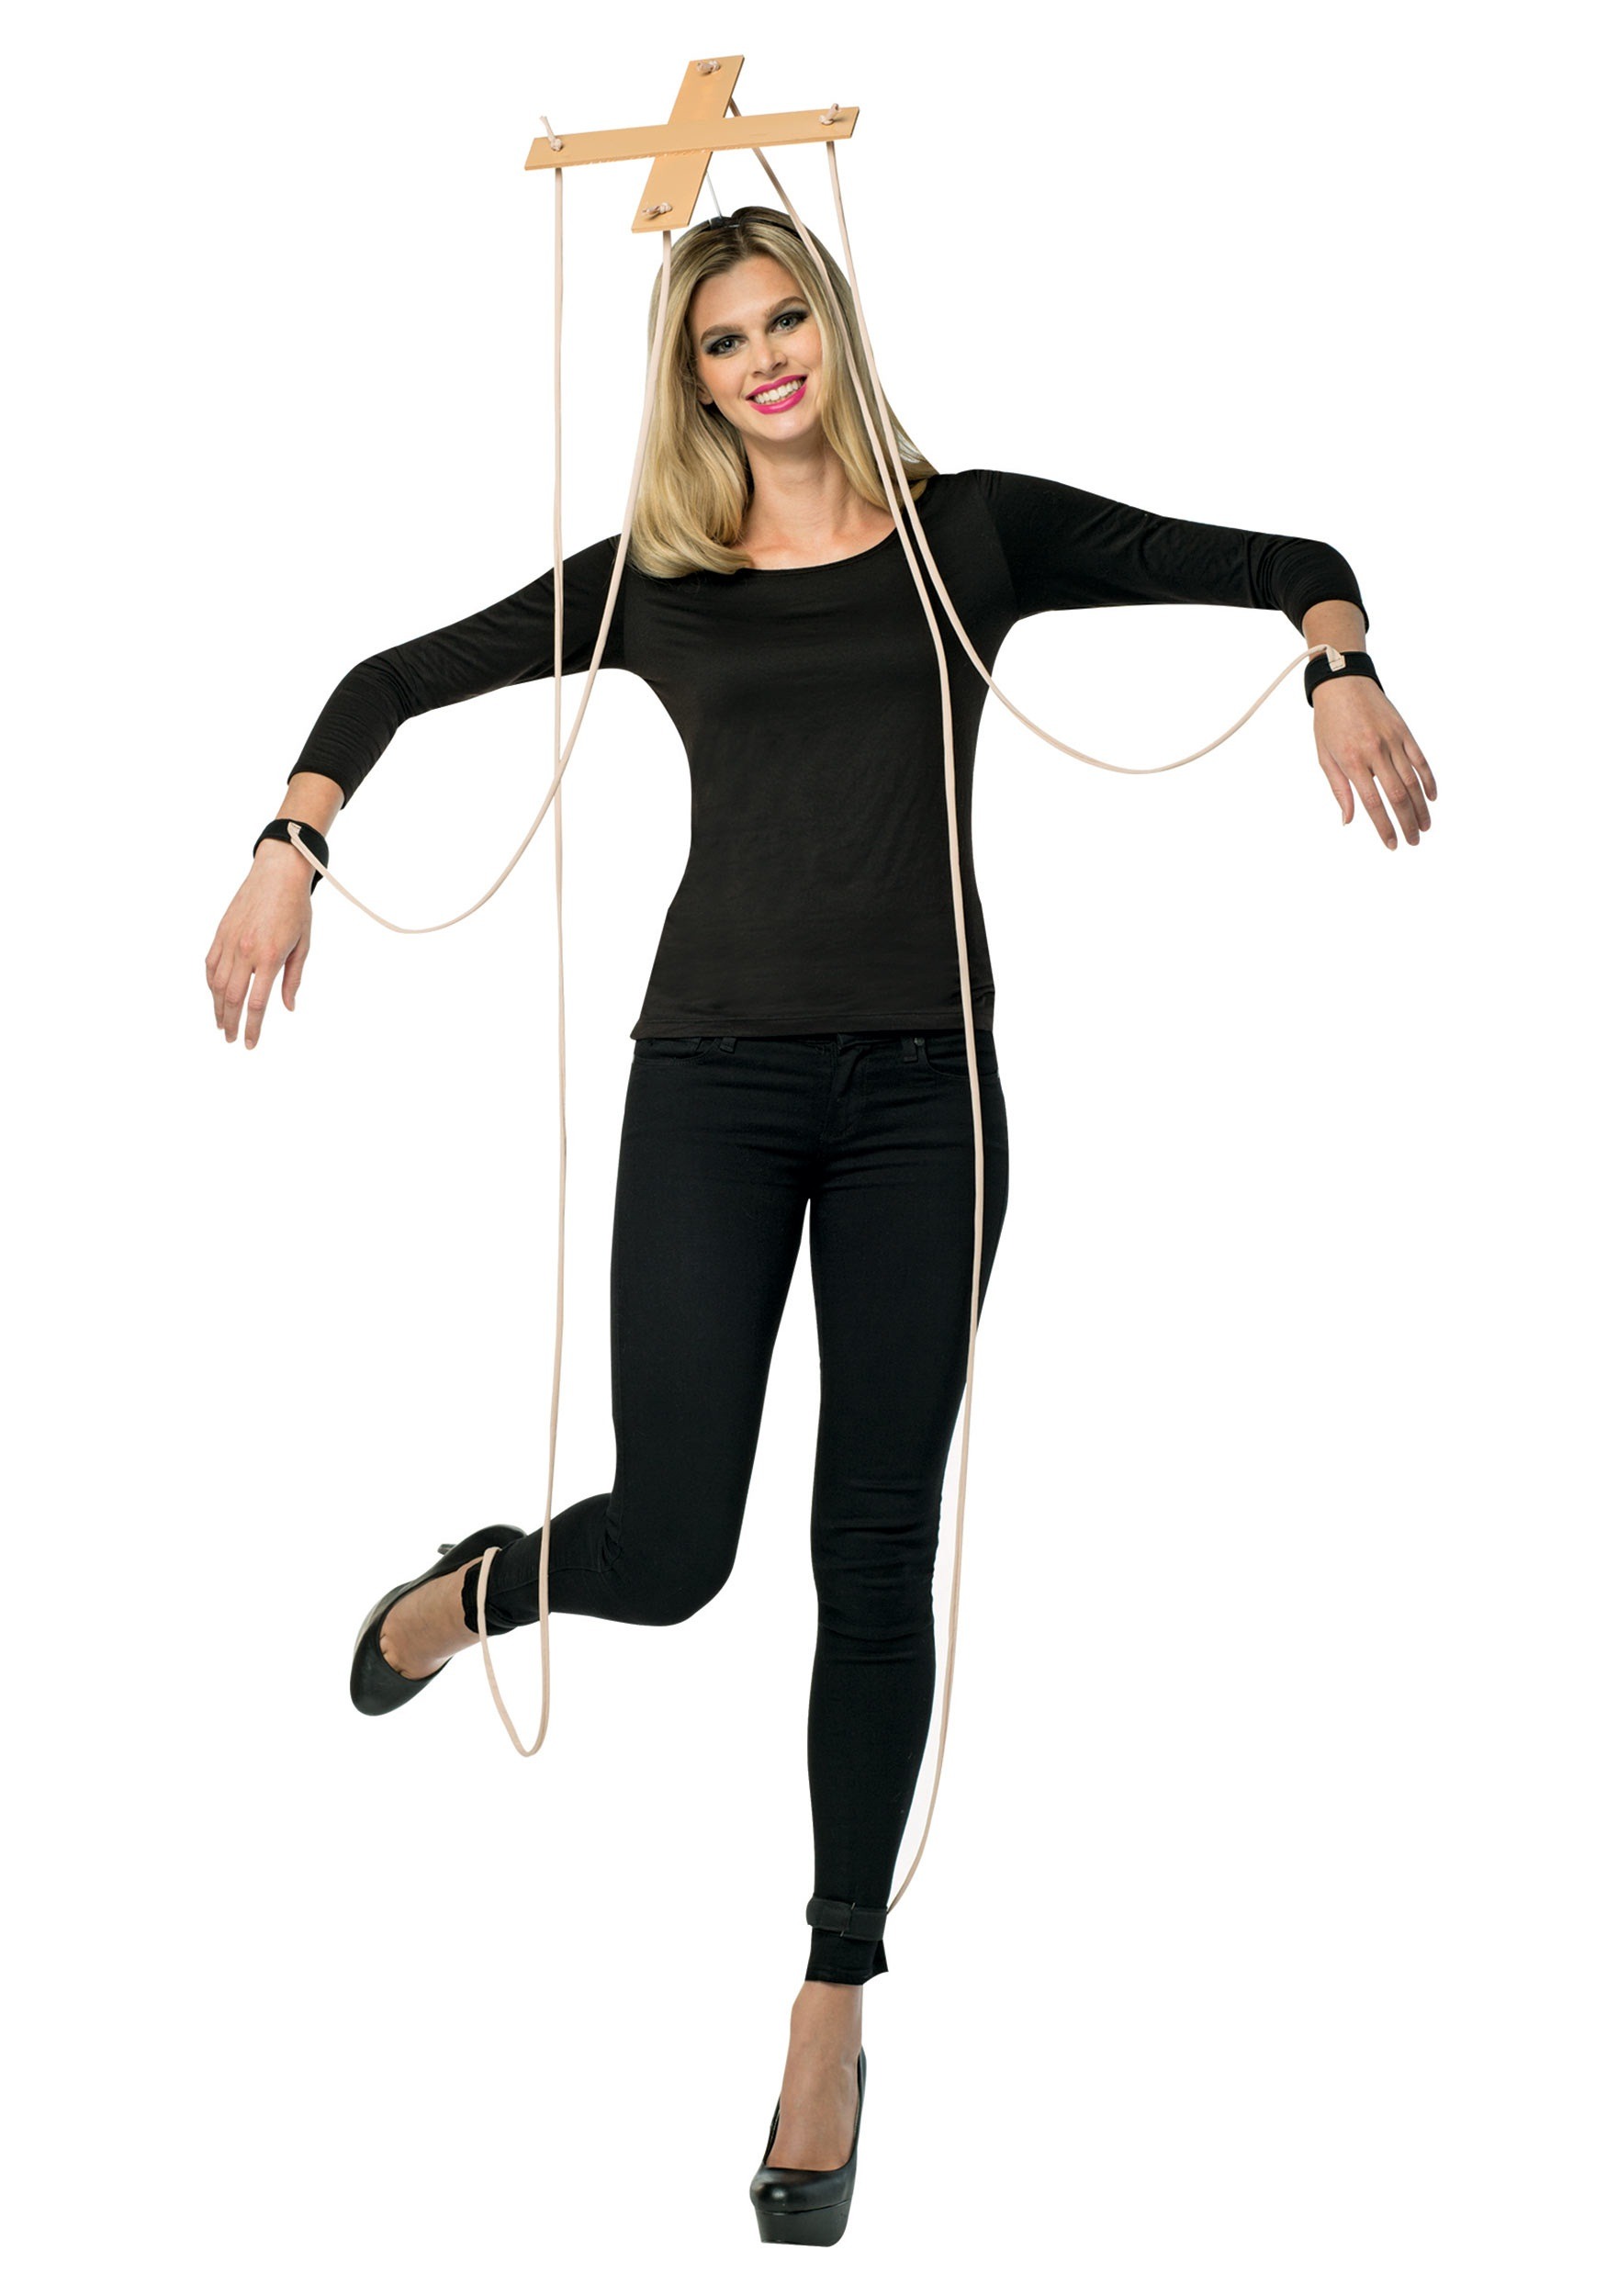 https://images.halloween.com/products/31482/1-1/marionette-kit.jpg